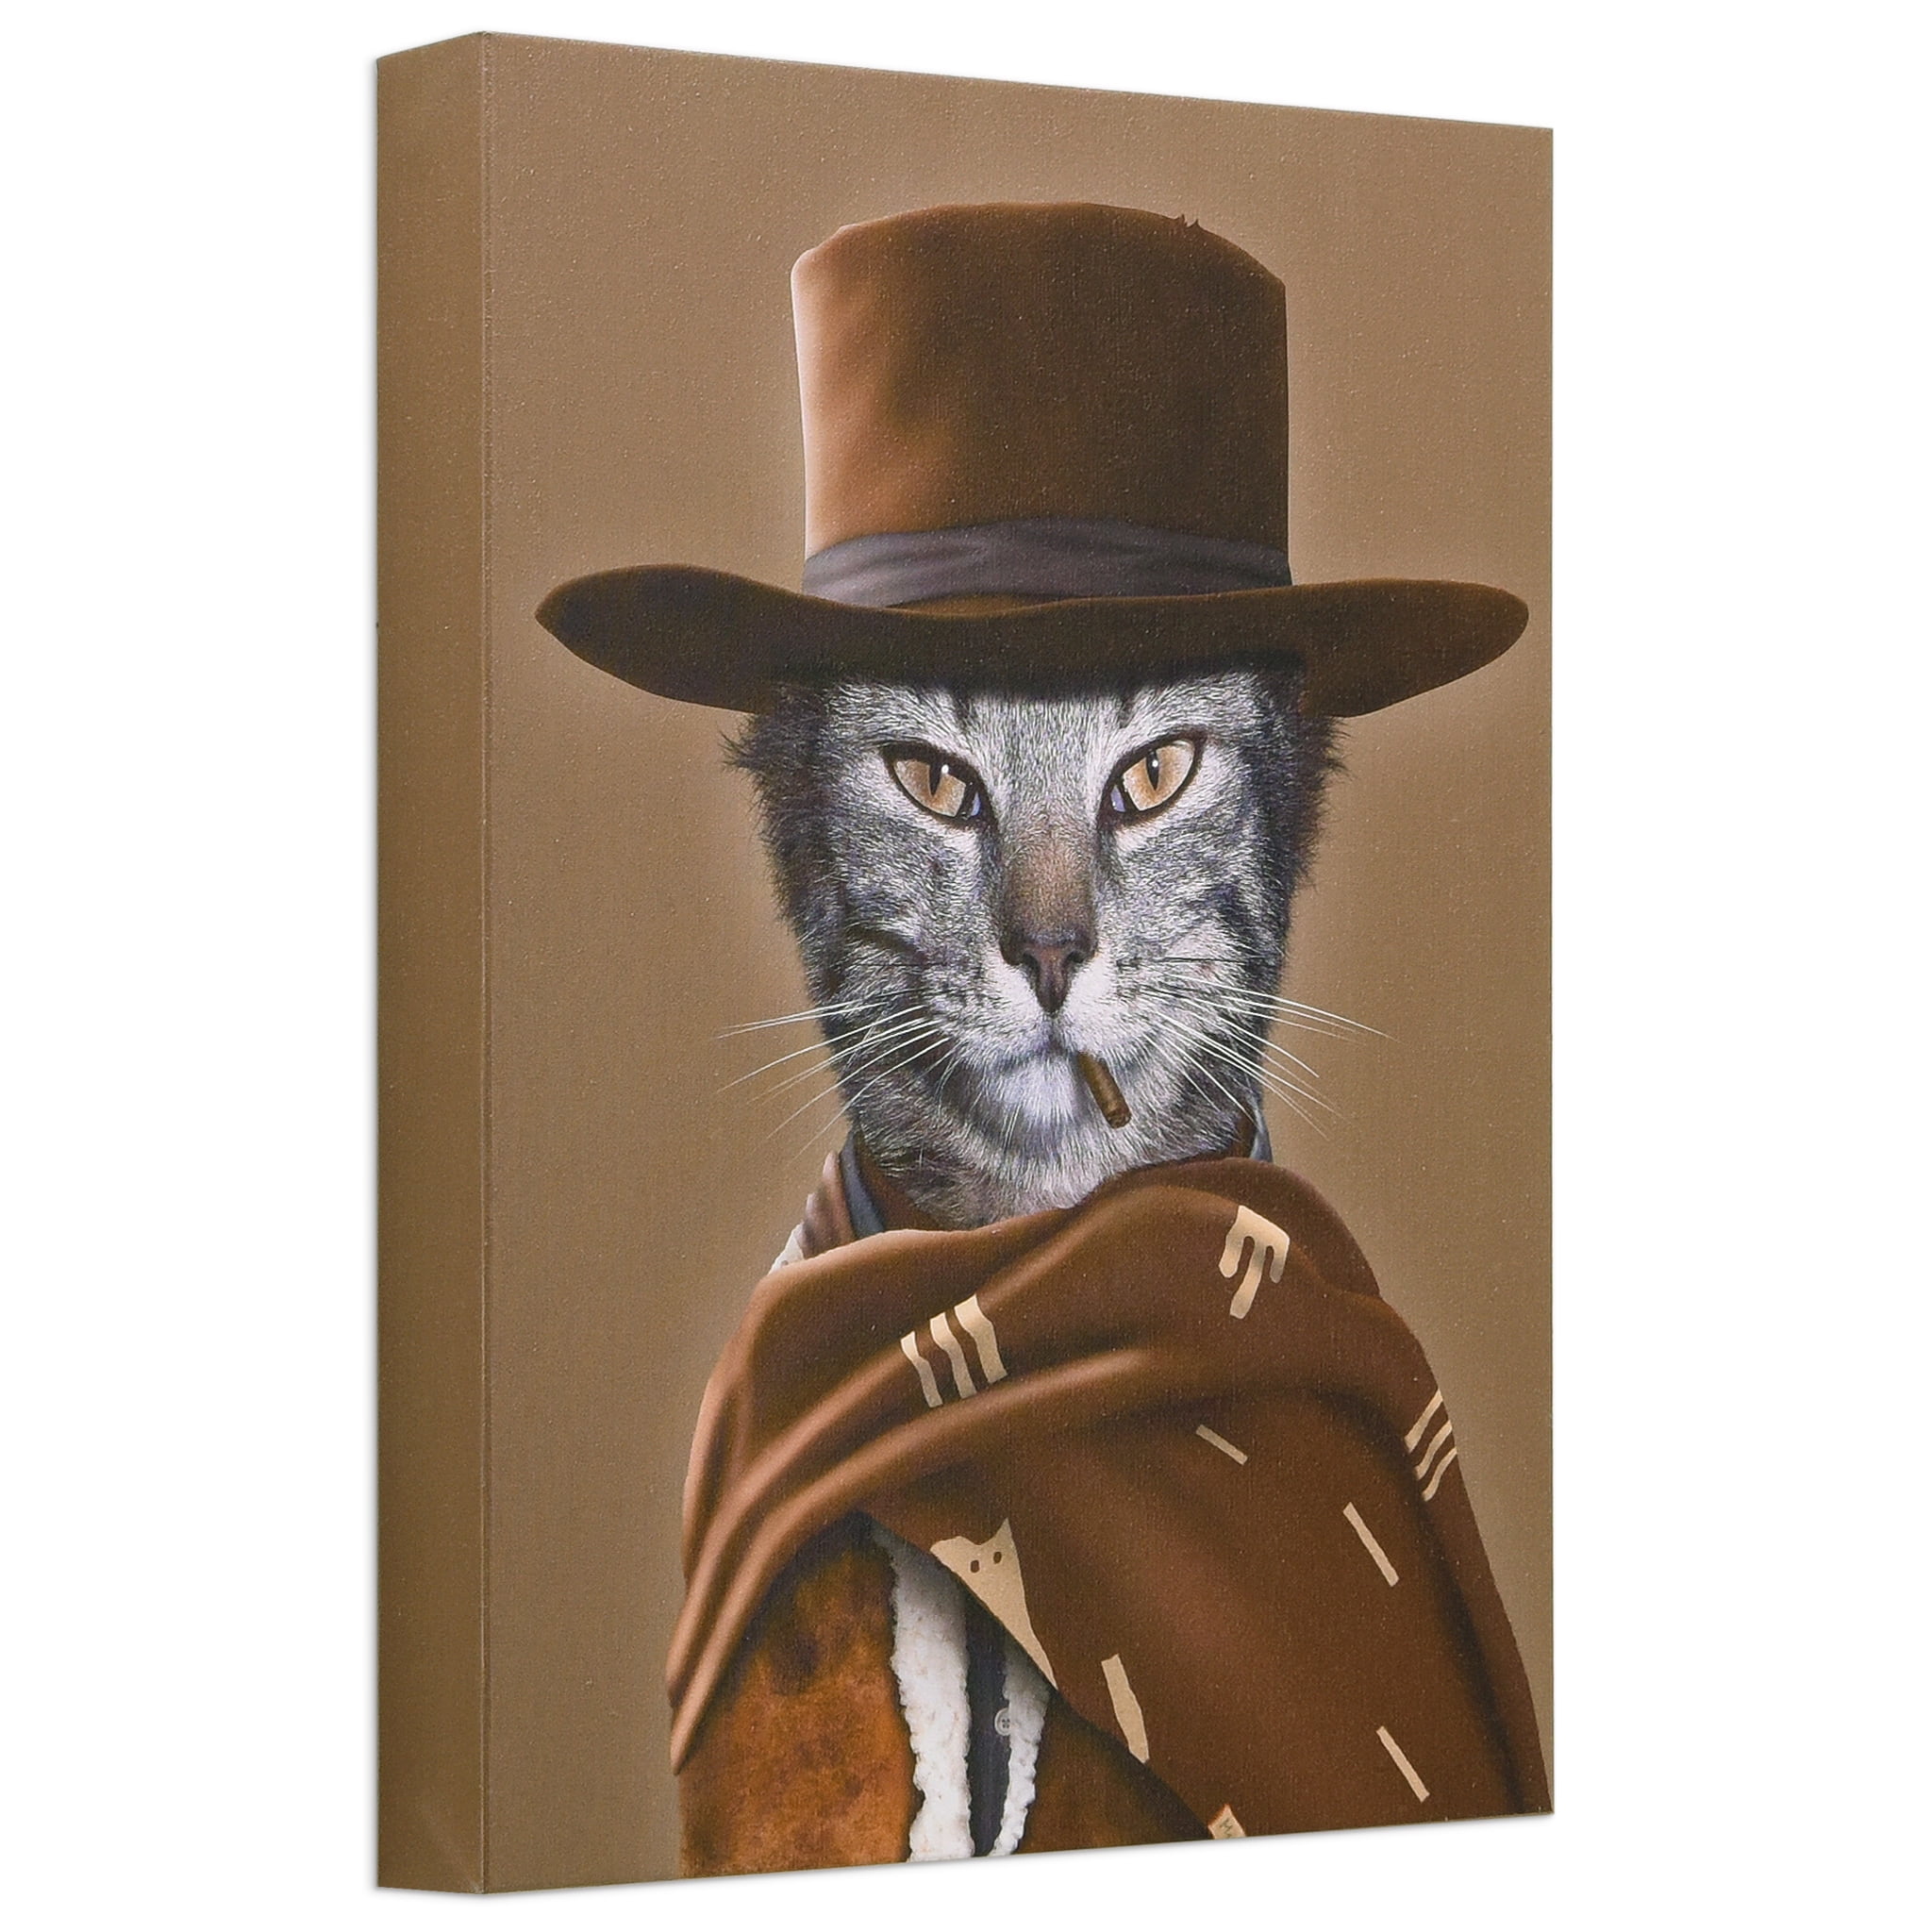 Empire Art Direct Pets Rock GG Graphic Art on Wrapped Cat Canvas Wall Art 